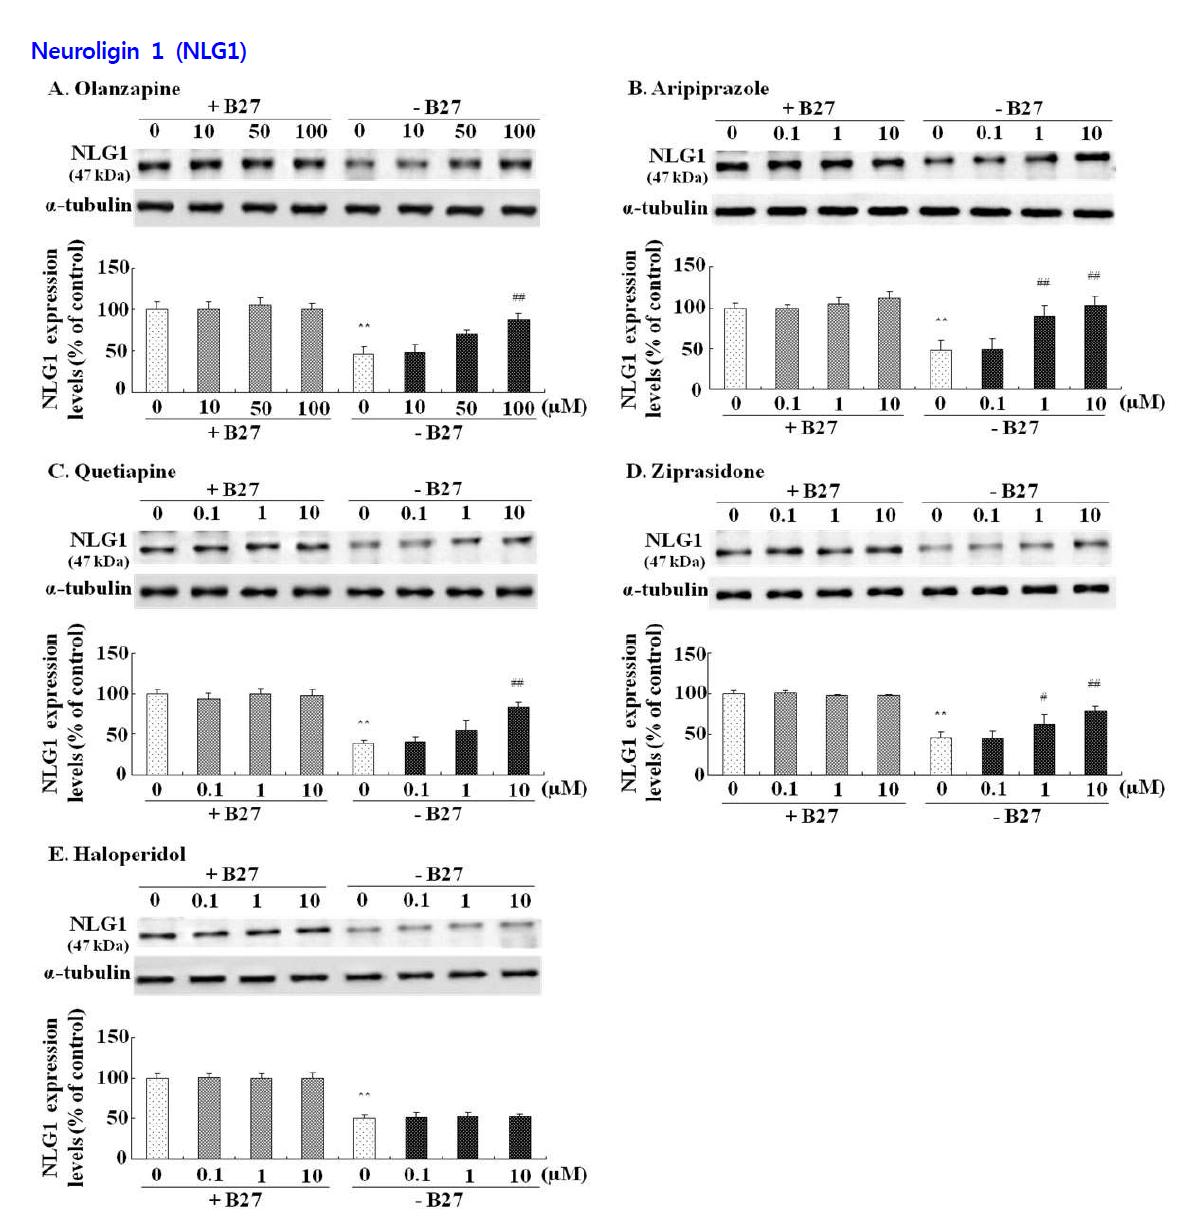 Effects of antipsychotic drugs on the expression of neuroligin 1 (NLG1) in hippocampal neurons.